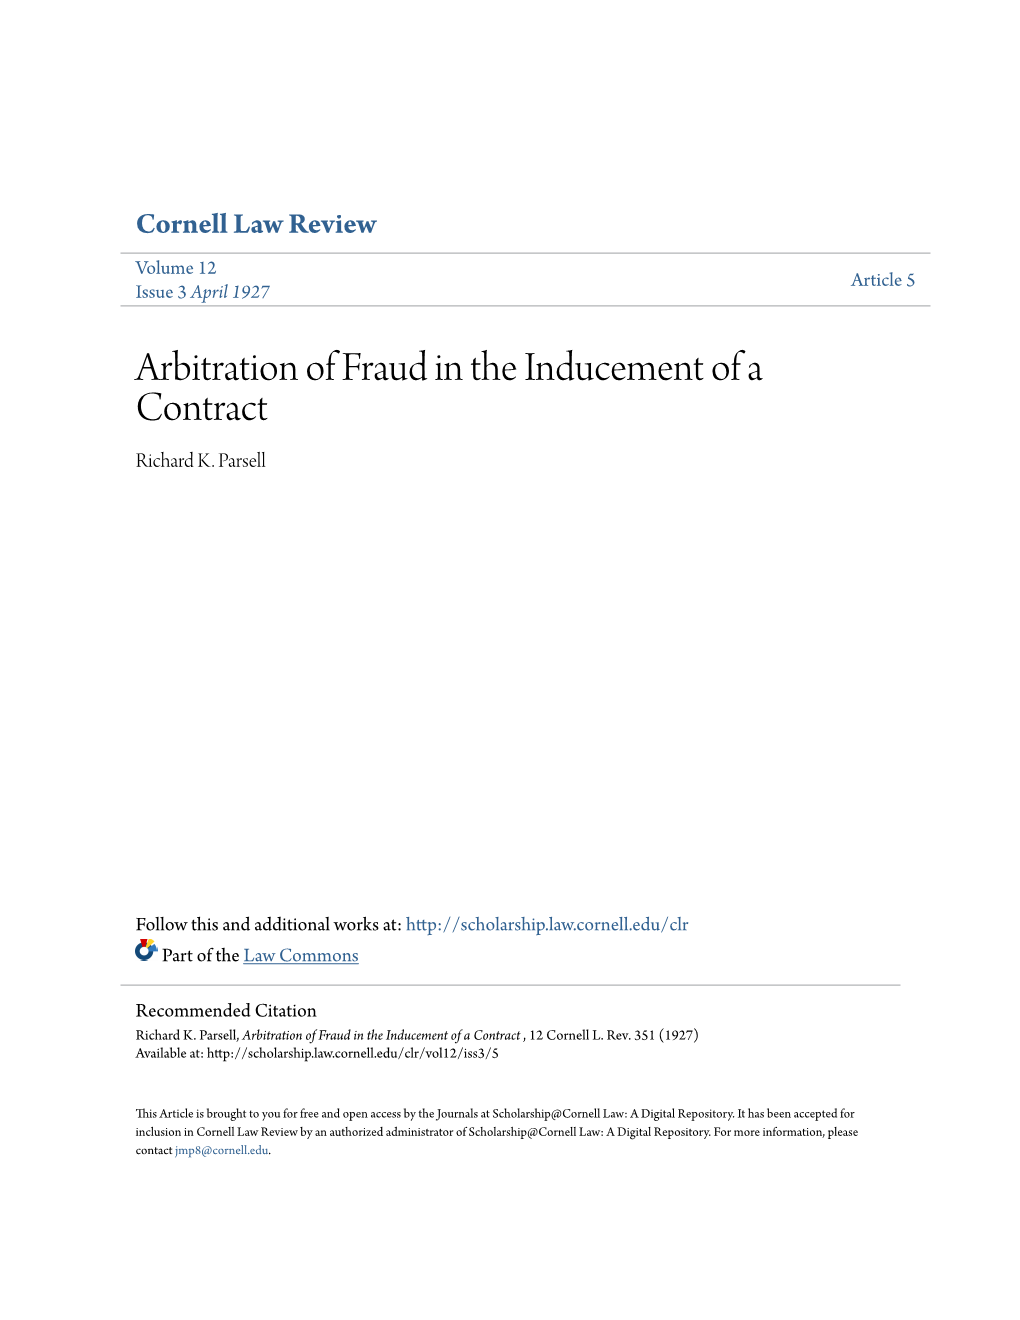 Arbitration of Fraud in the Inducement of a Contract Richard K